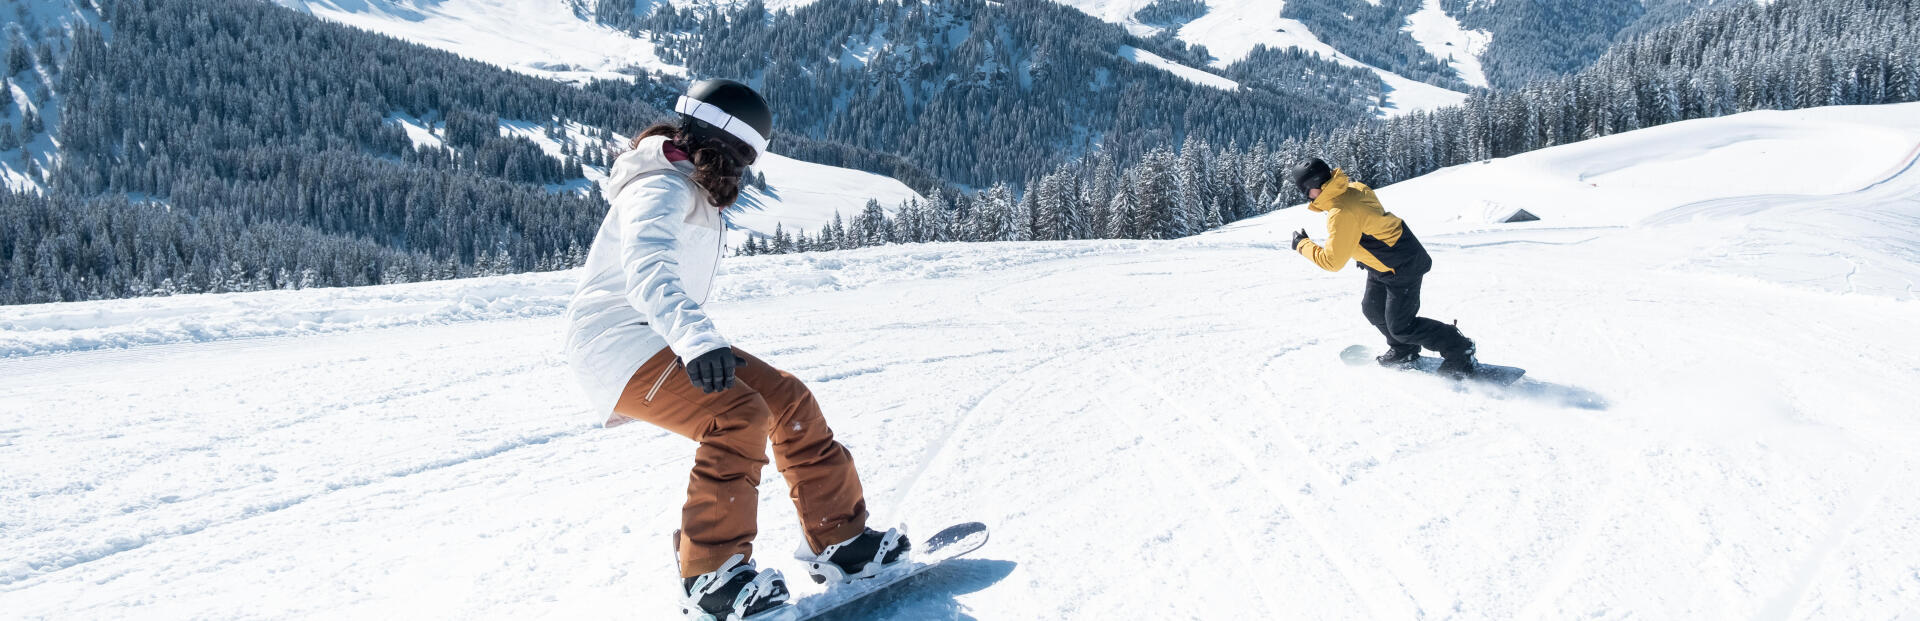 discover snowboarding